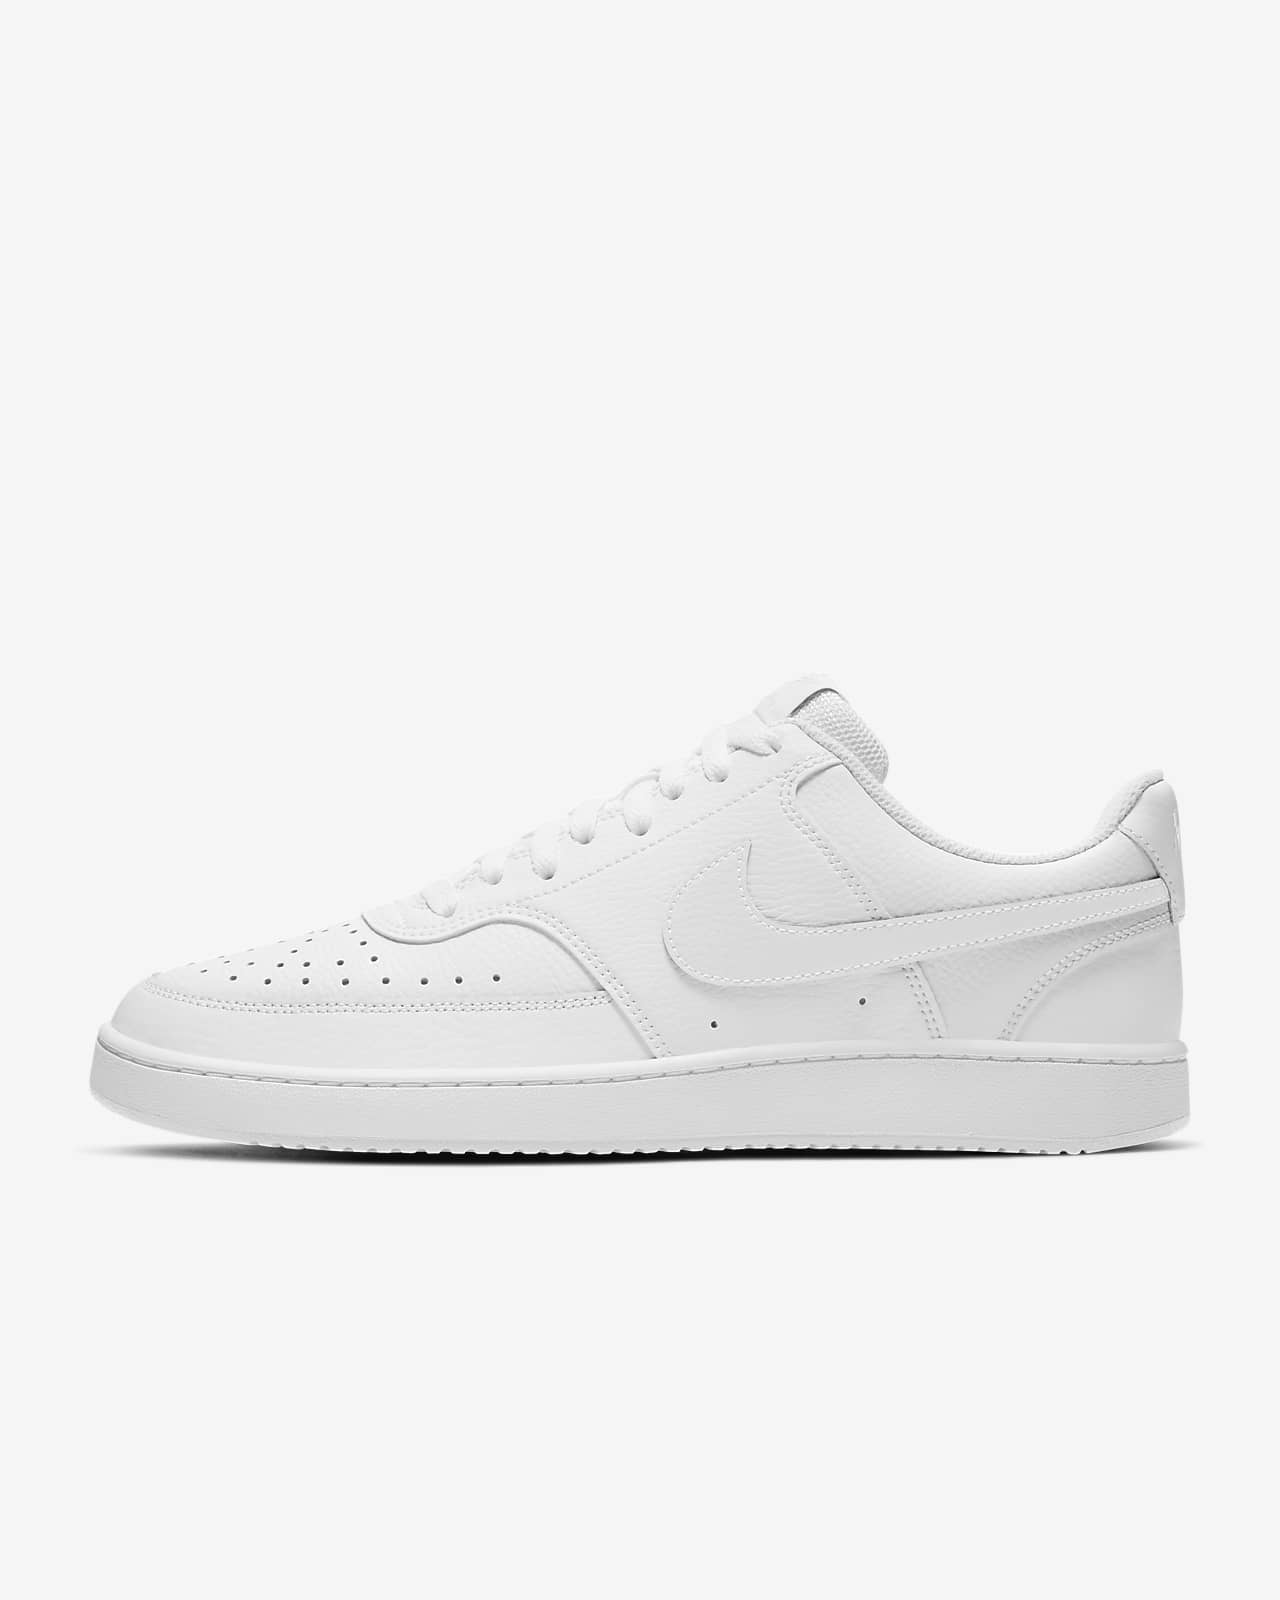 nike low court vision shoes